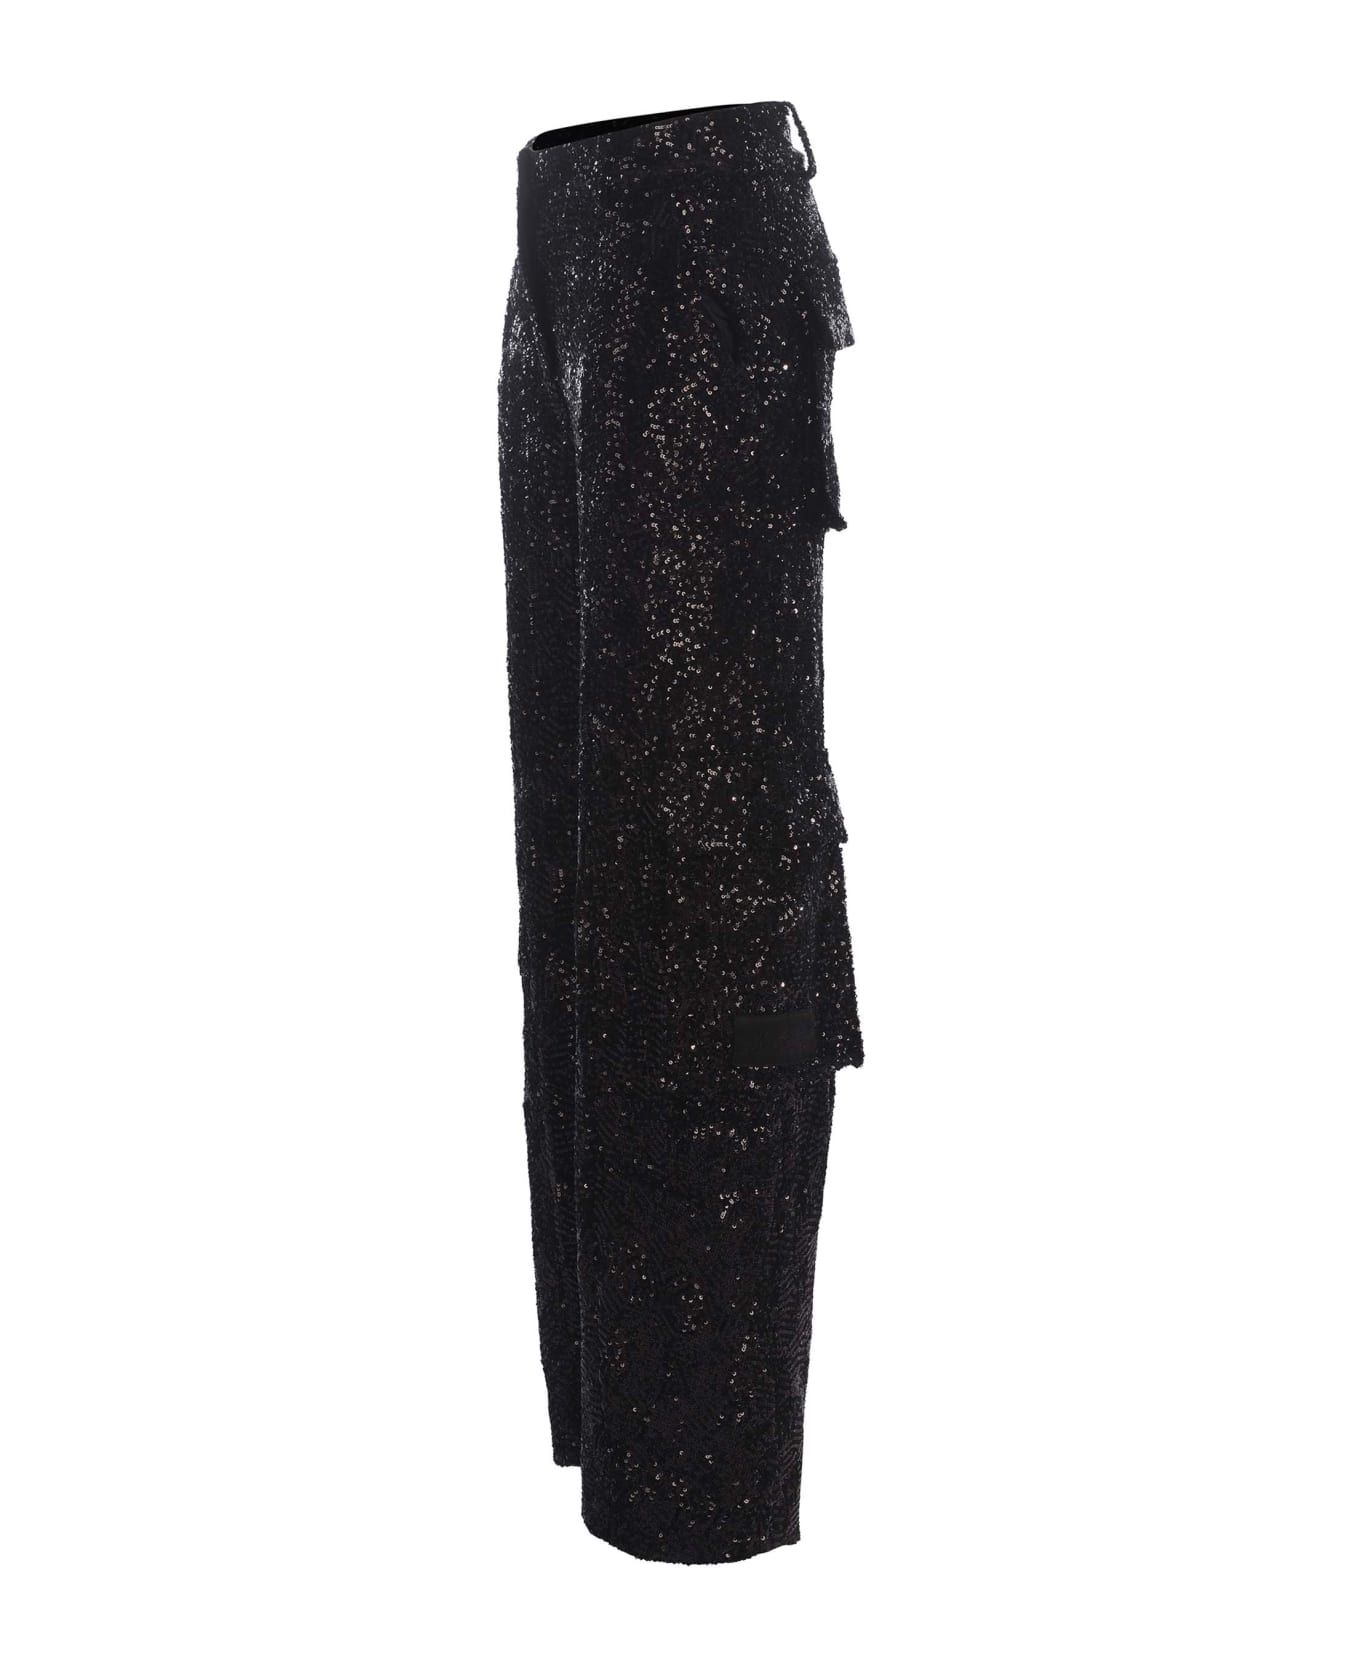 Rotate by Birger Christensen Sequin Cargo Trousers